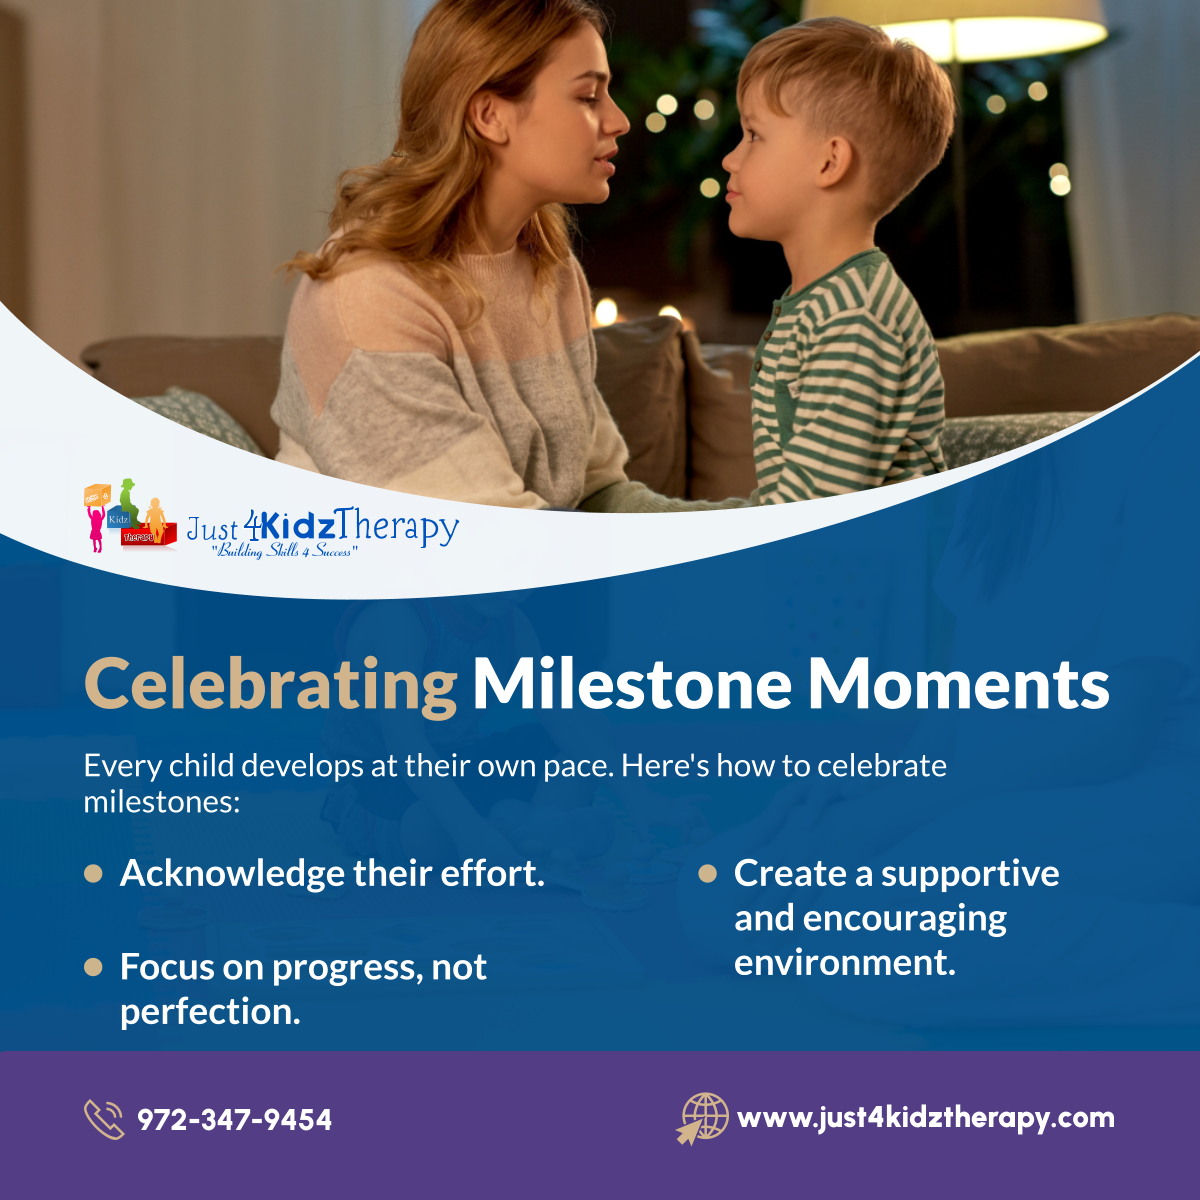 Celebrate every step of the way! These tips can help build confidence and support your child's development. 

#CollinCountyTX #PediatricTherapyServices #CelebrateMilestones #ParentingSupport #MilestonesMoments